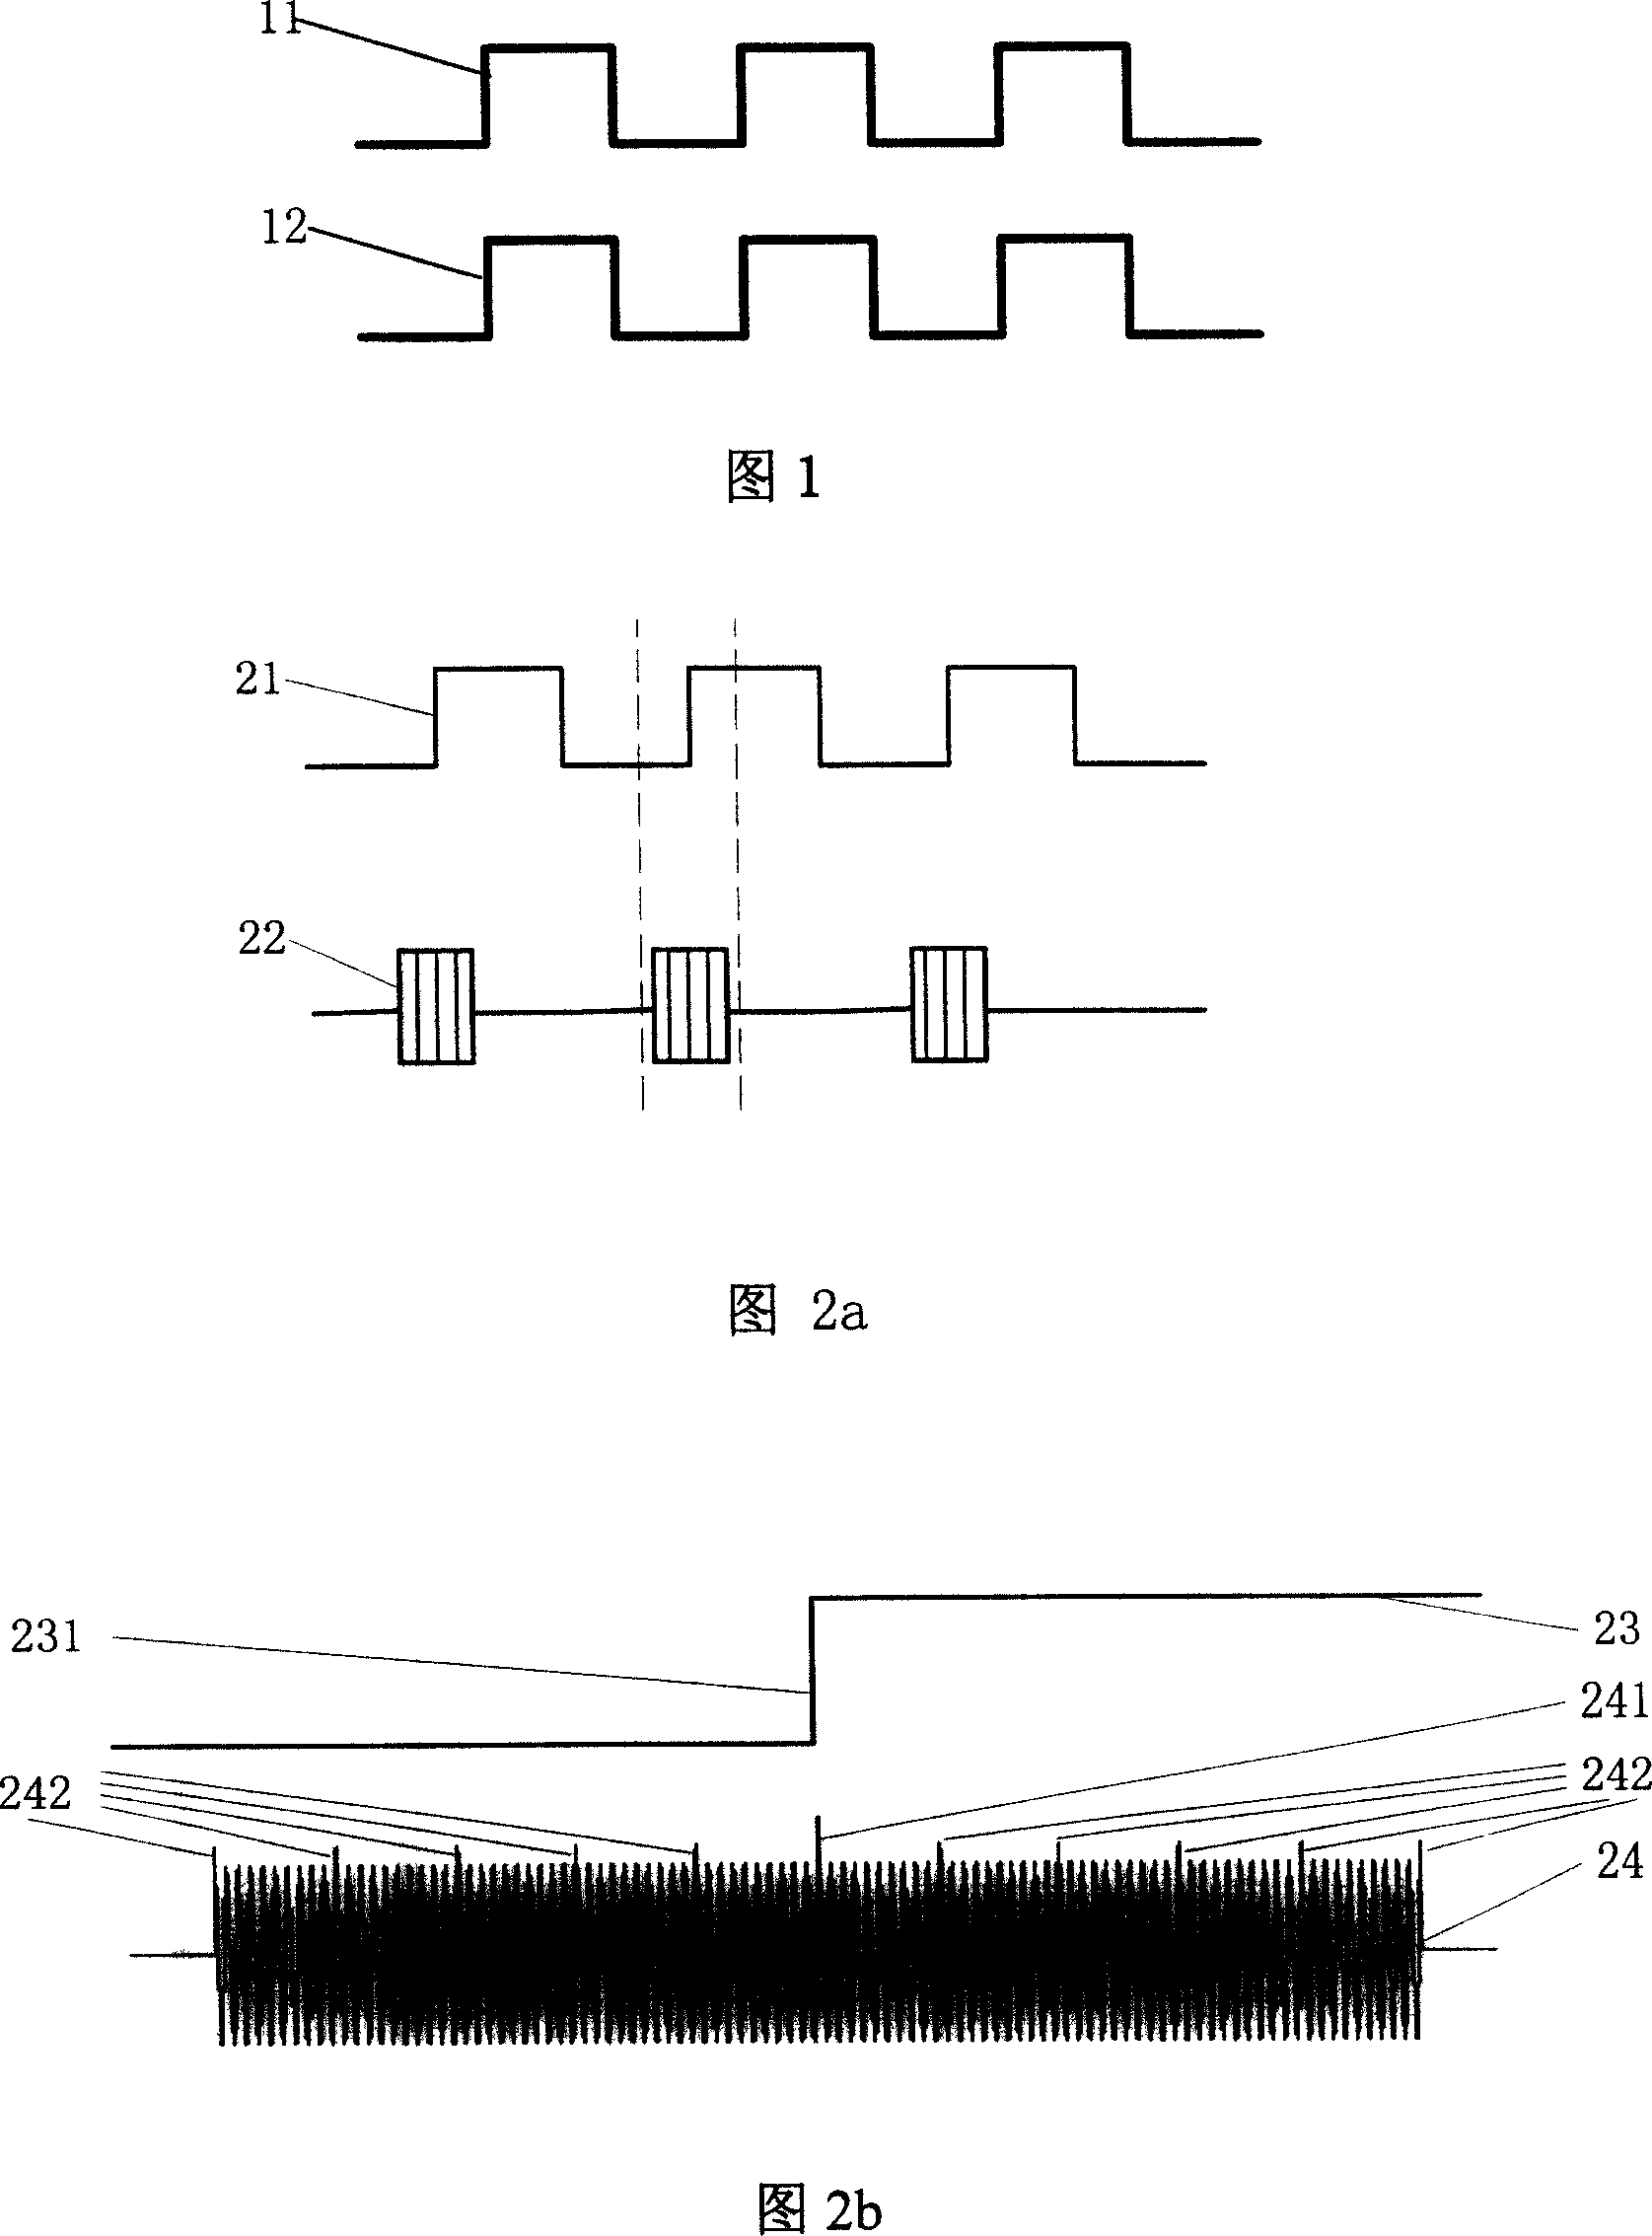 Digital TV video and audio synchronous testing signal and measuring method thereof